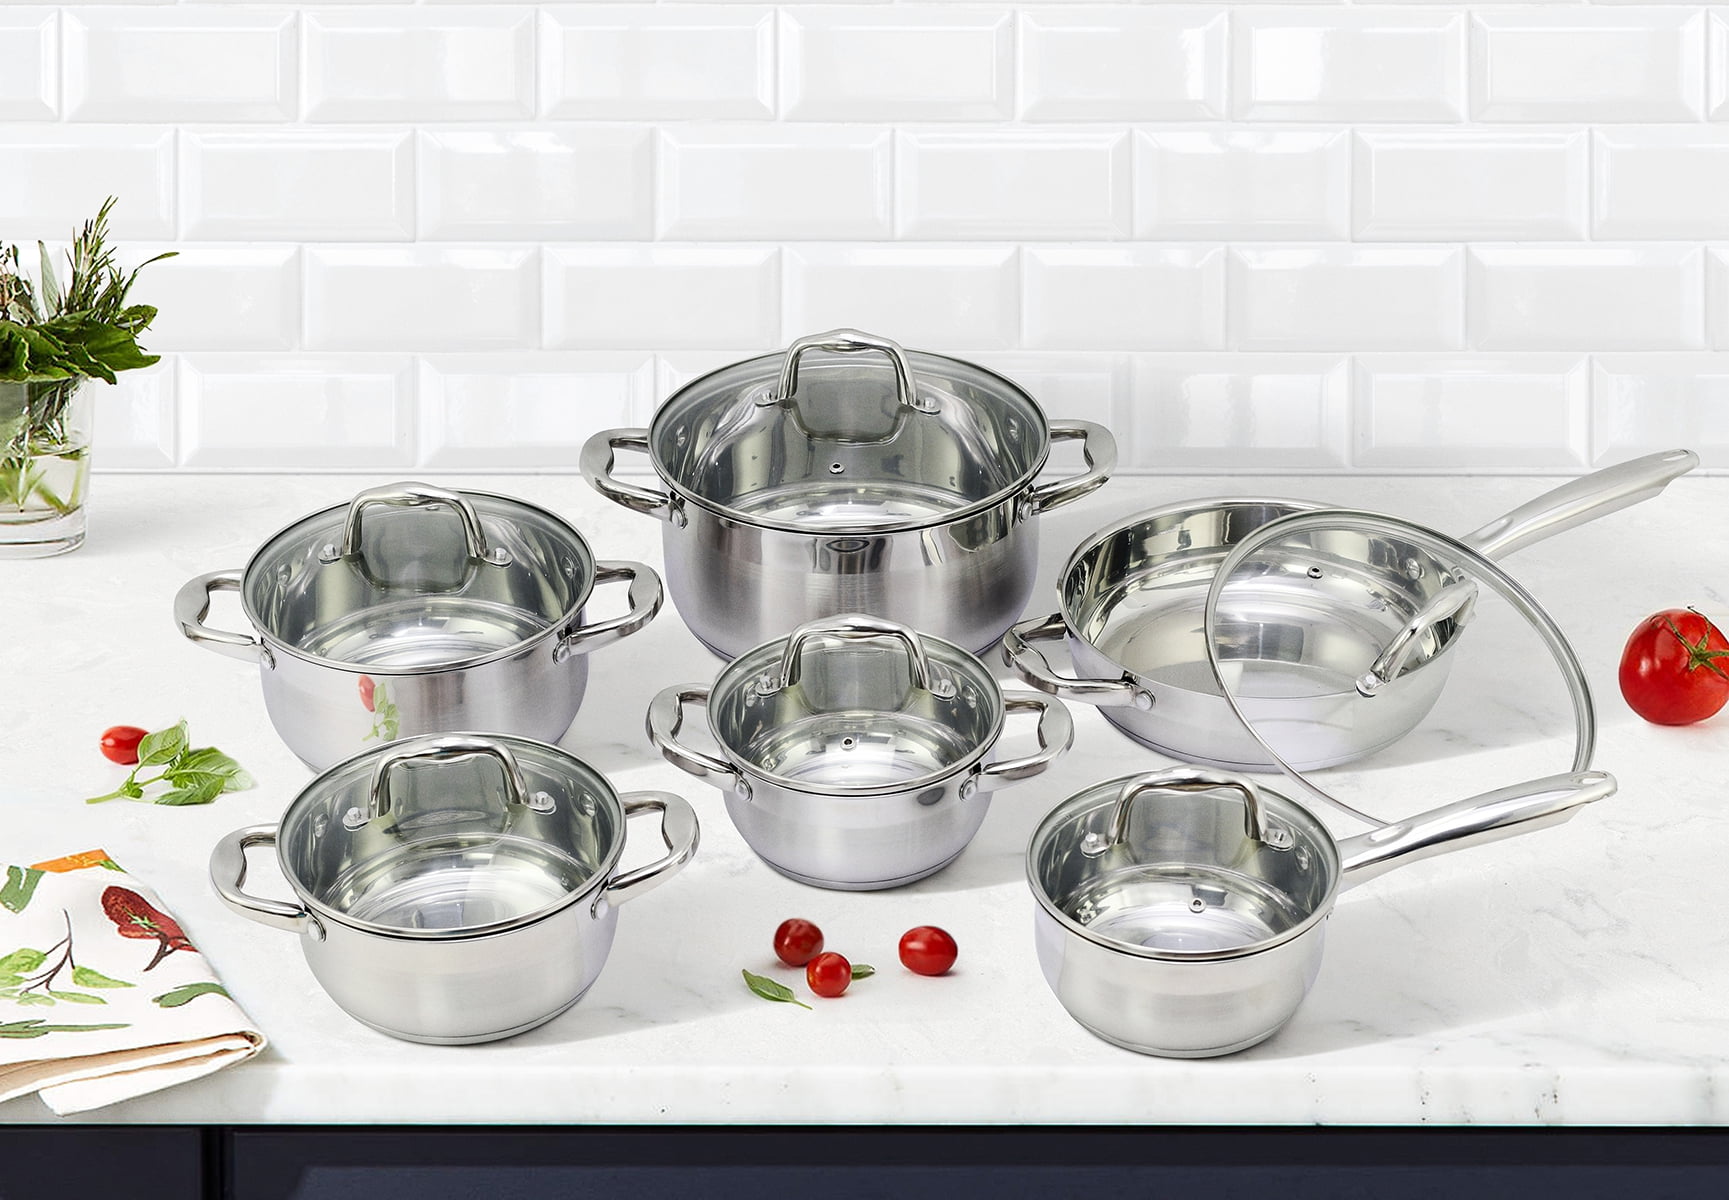 KitchenAid 3-Ply Base Brushed Finish Stainless Steel Cookware Set, 12-Piece